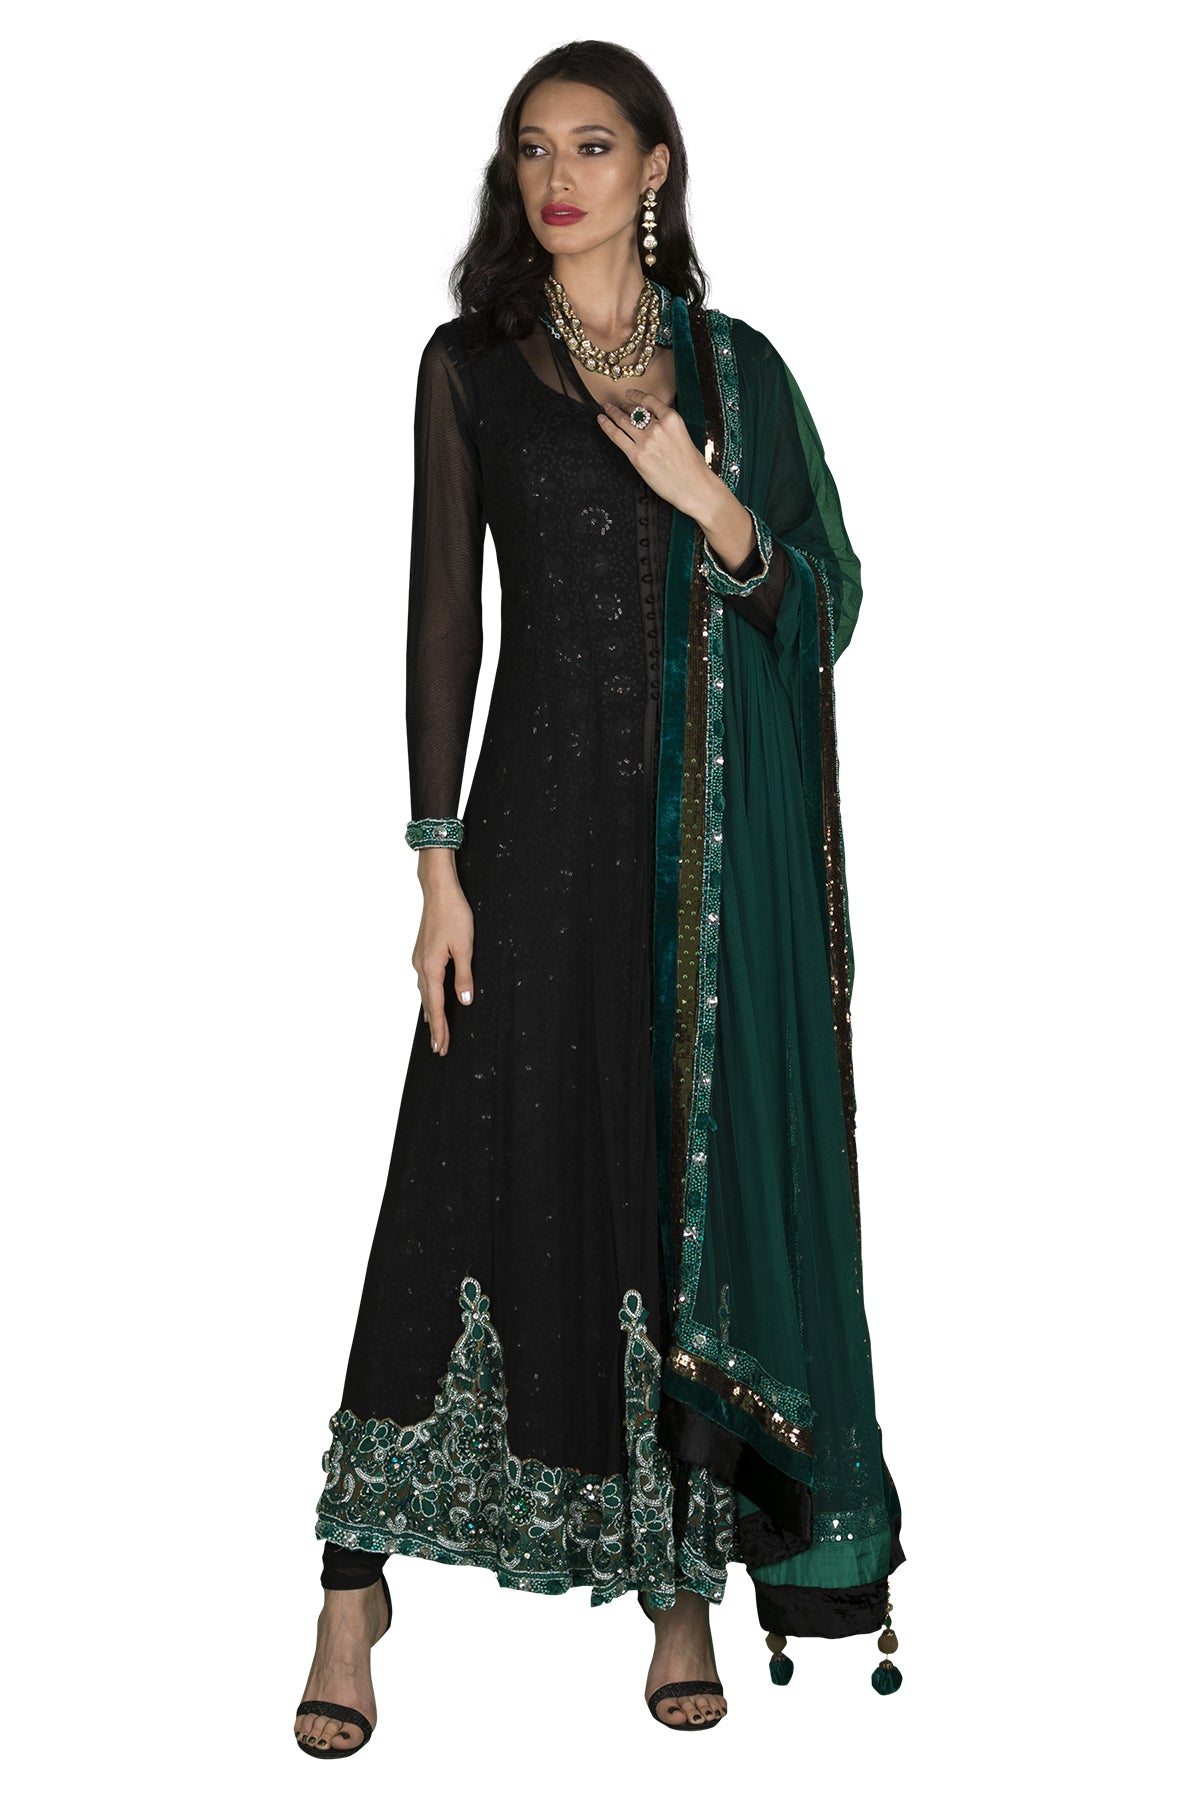 Black Anarkali with green dupatta which is a pleasure to watch, the shine just doesn't allow us to take our eyes off. 
